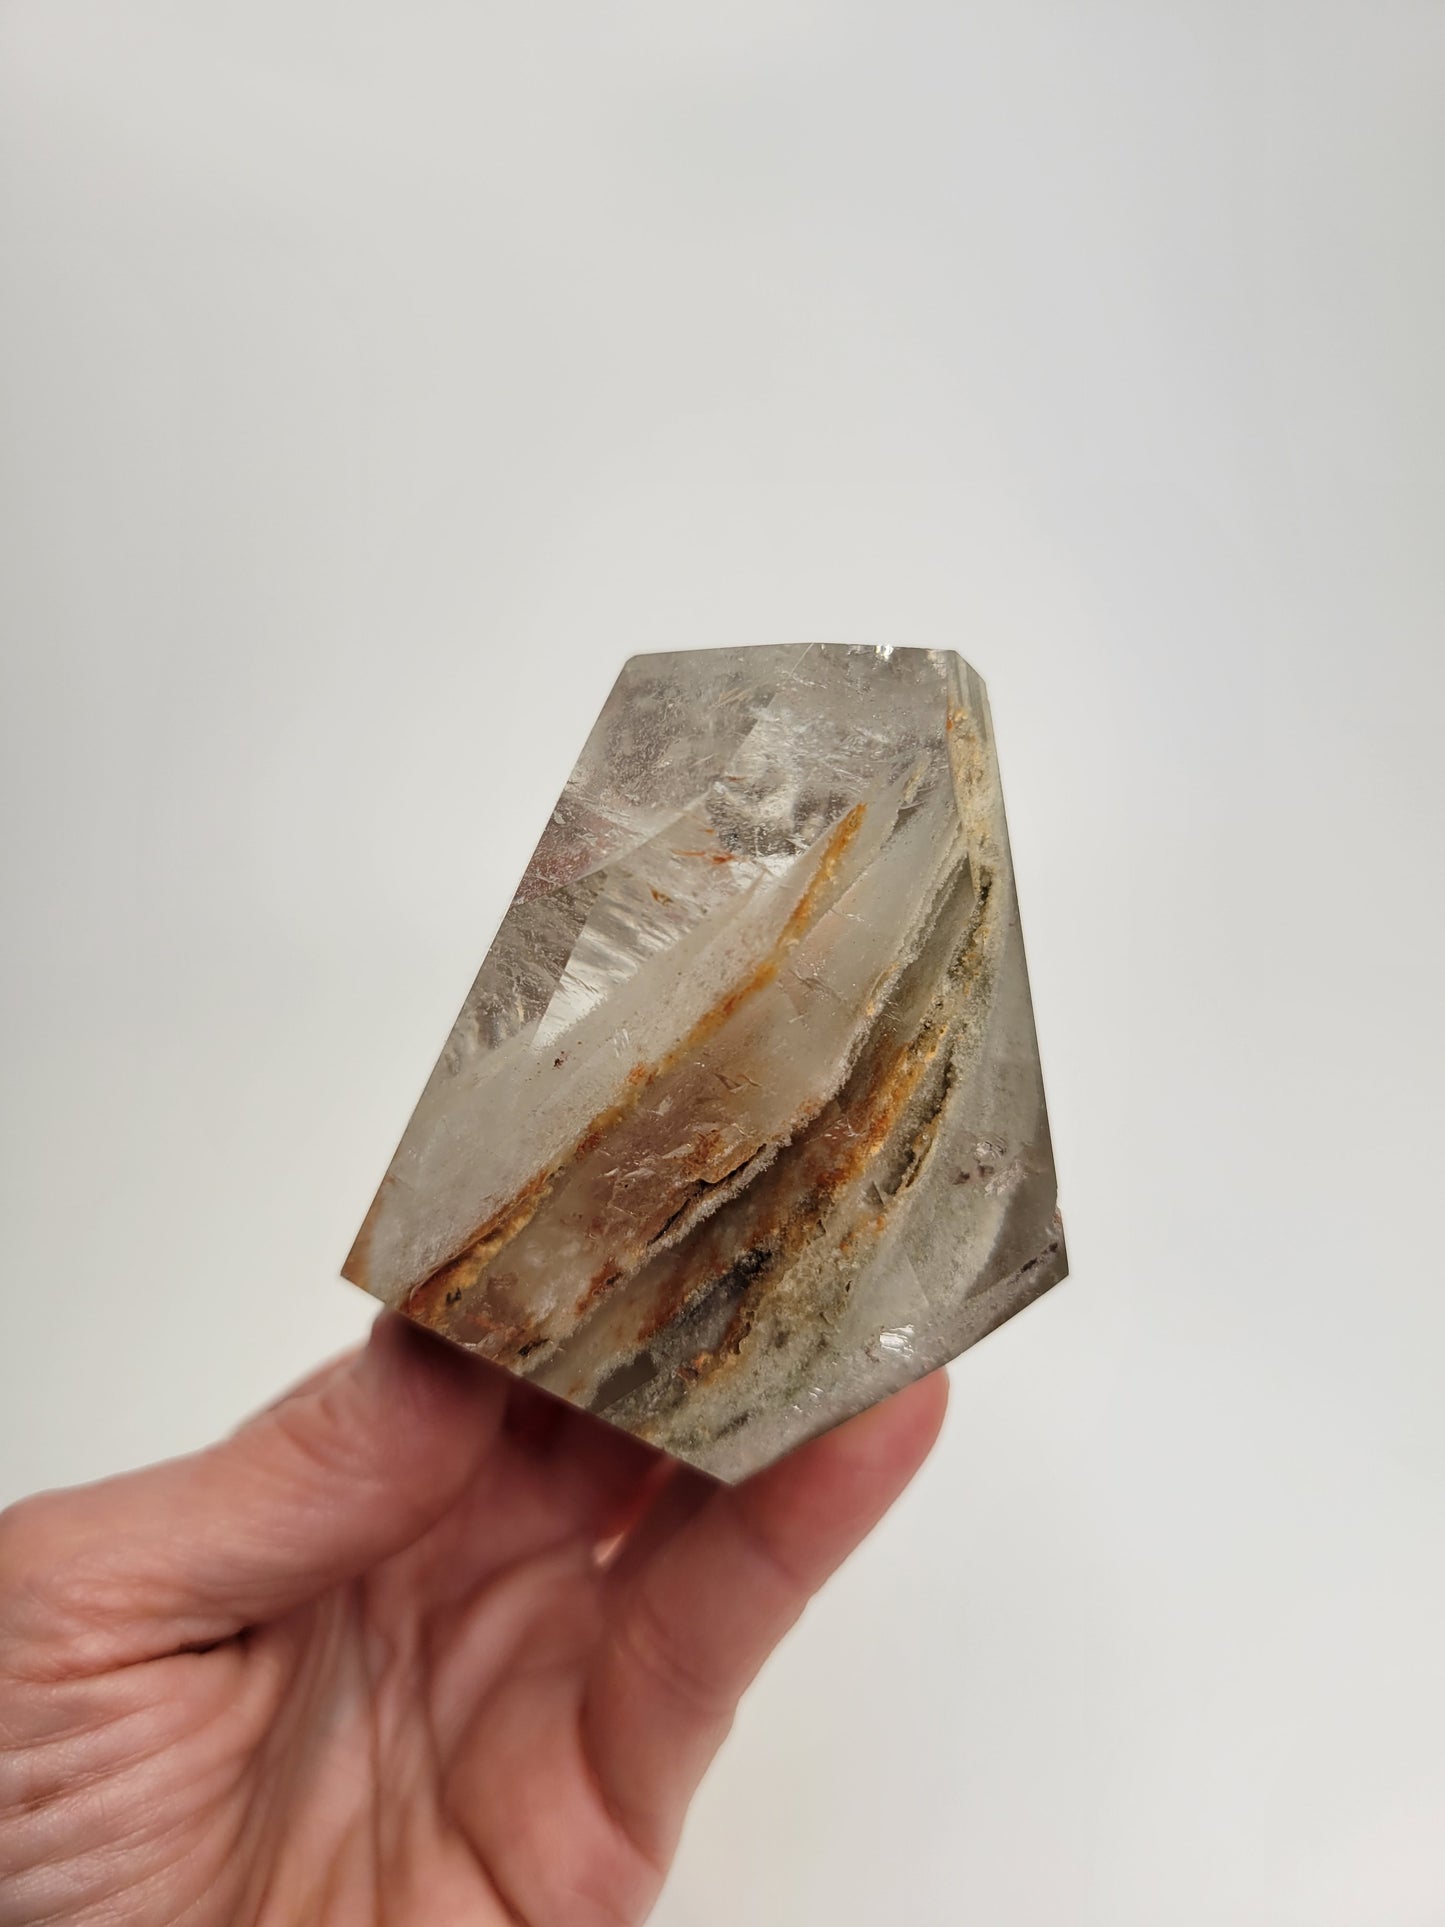 Included Quartz Polished Free Form from Brazil (3 X 2 1/2 X 2 inches)